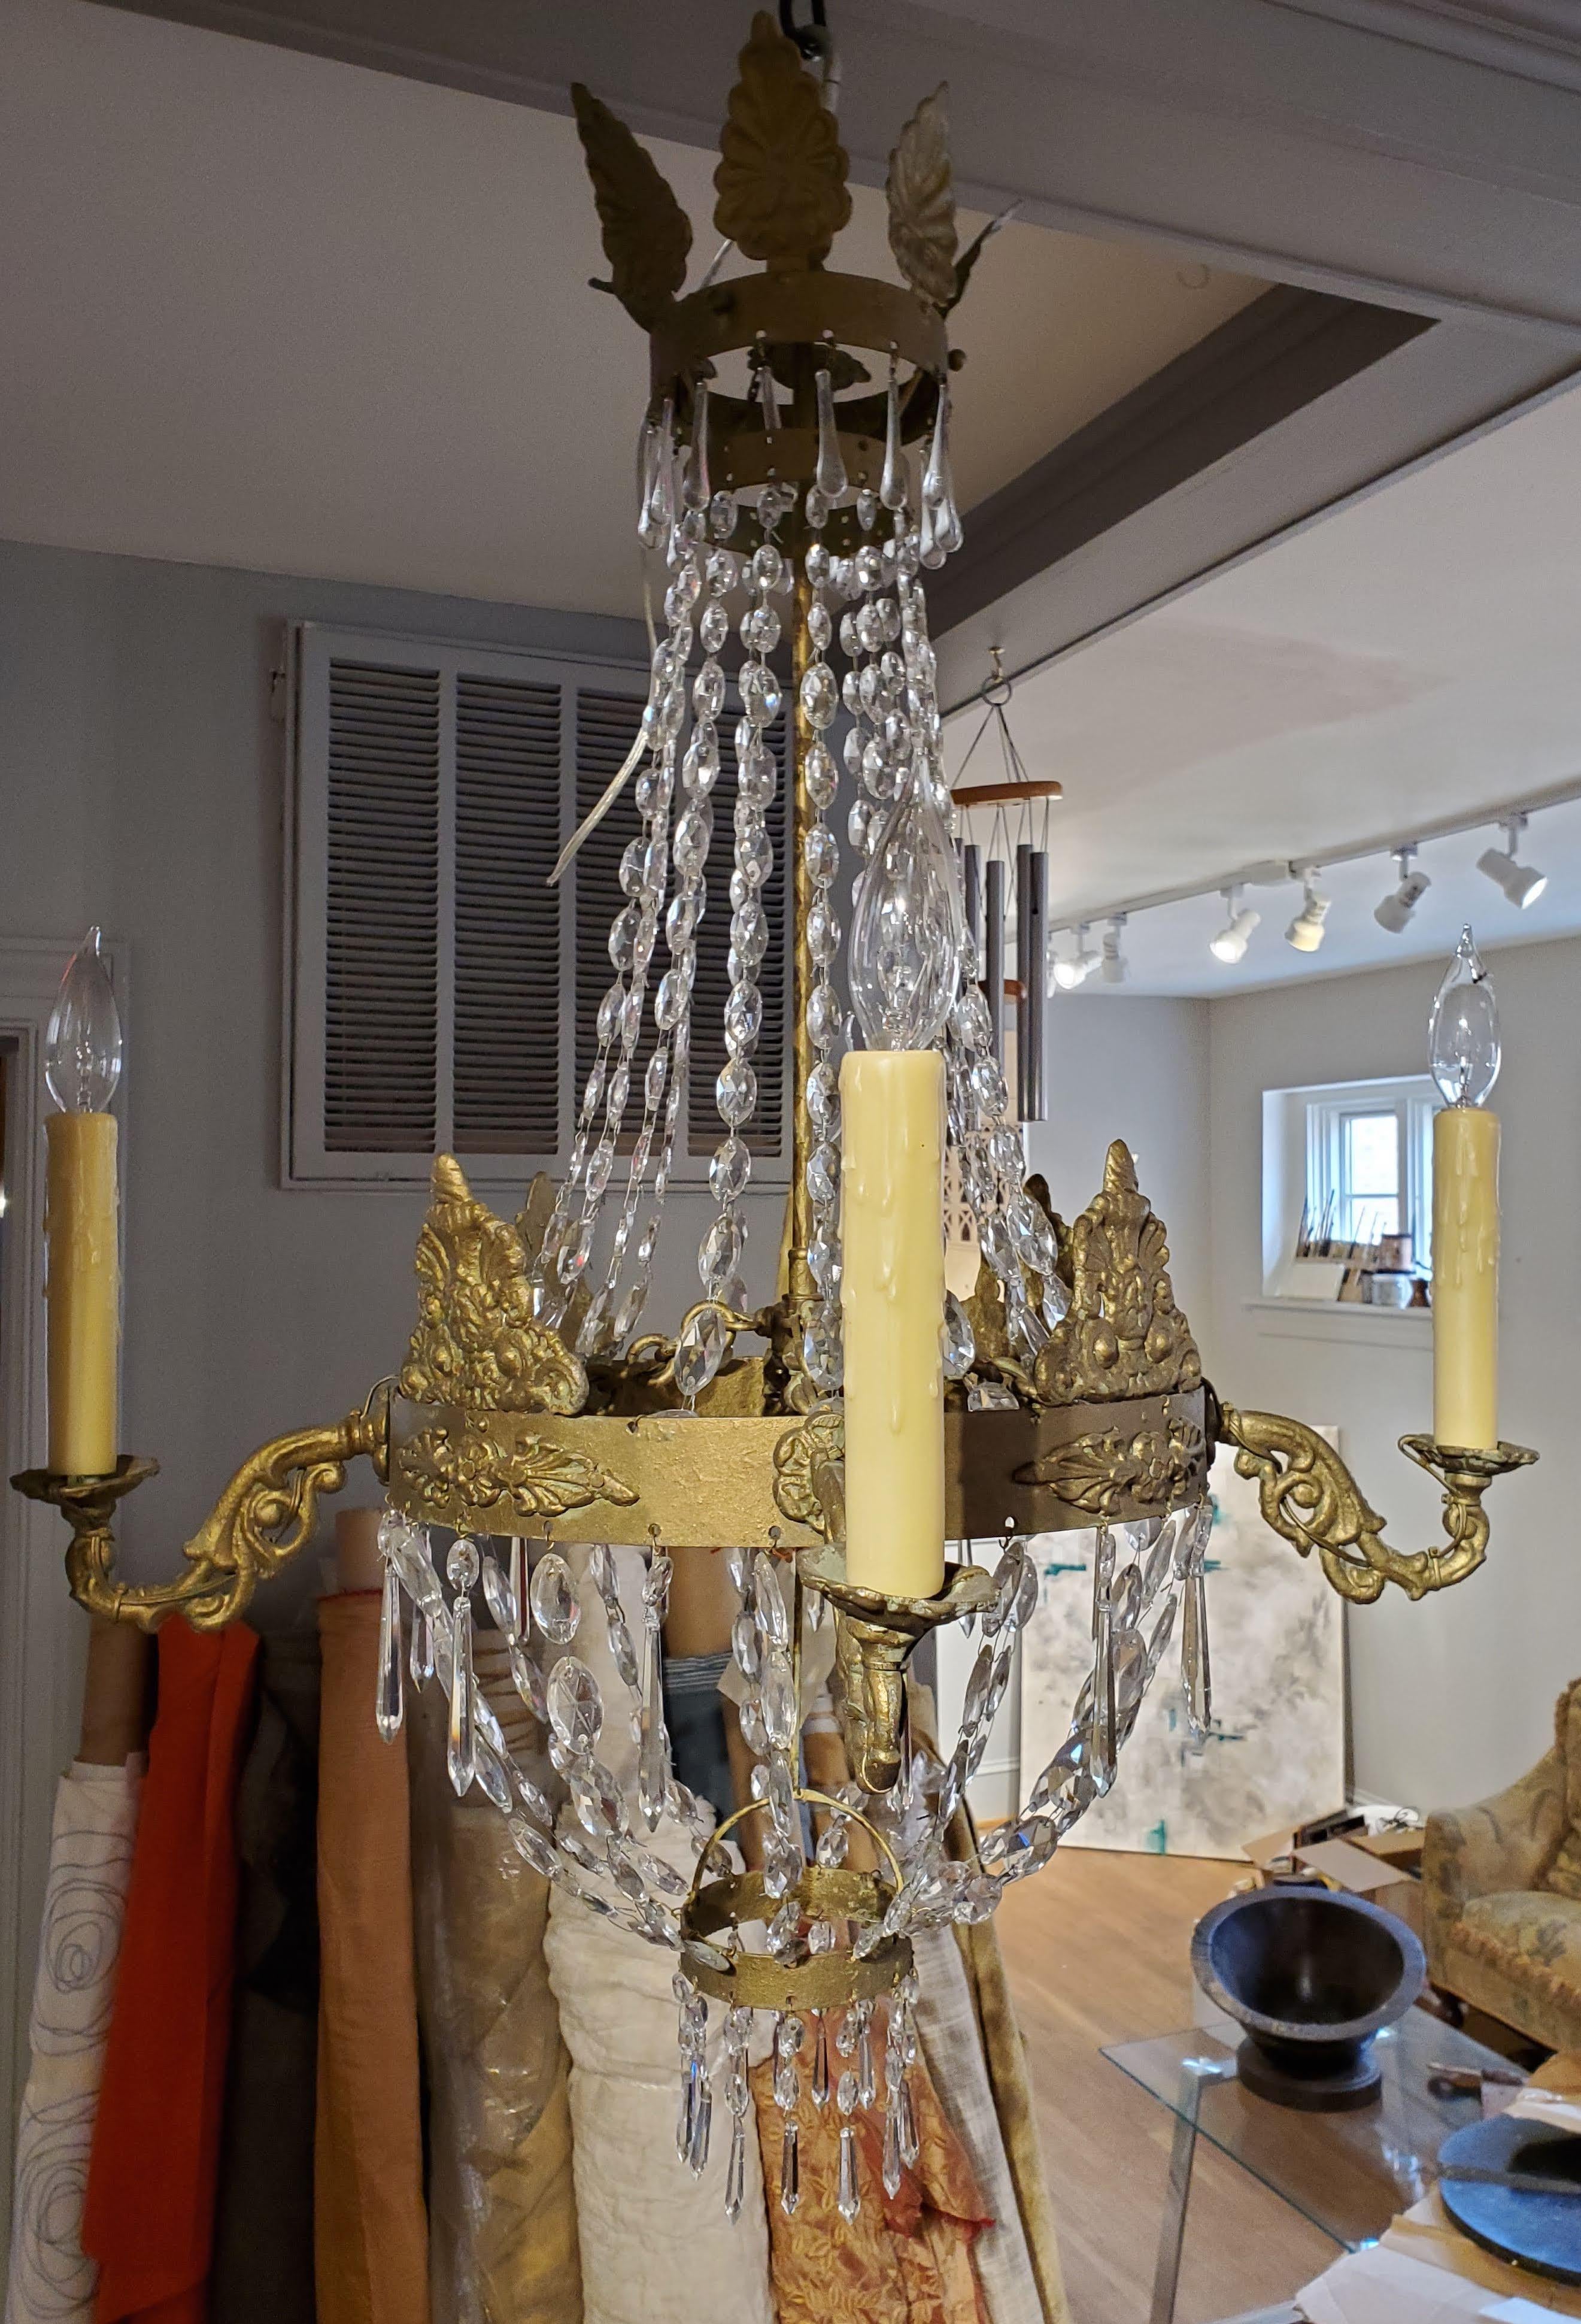 Add some glamour to your room with this beautiful 19th century Napoleonic chandelier made of painted tole with delicate crystal garlands and flowers. Needs rewiring - can accommodate upon request and additional cost.
France, circa 1880.
Measures: